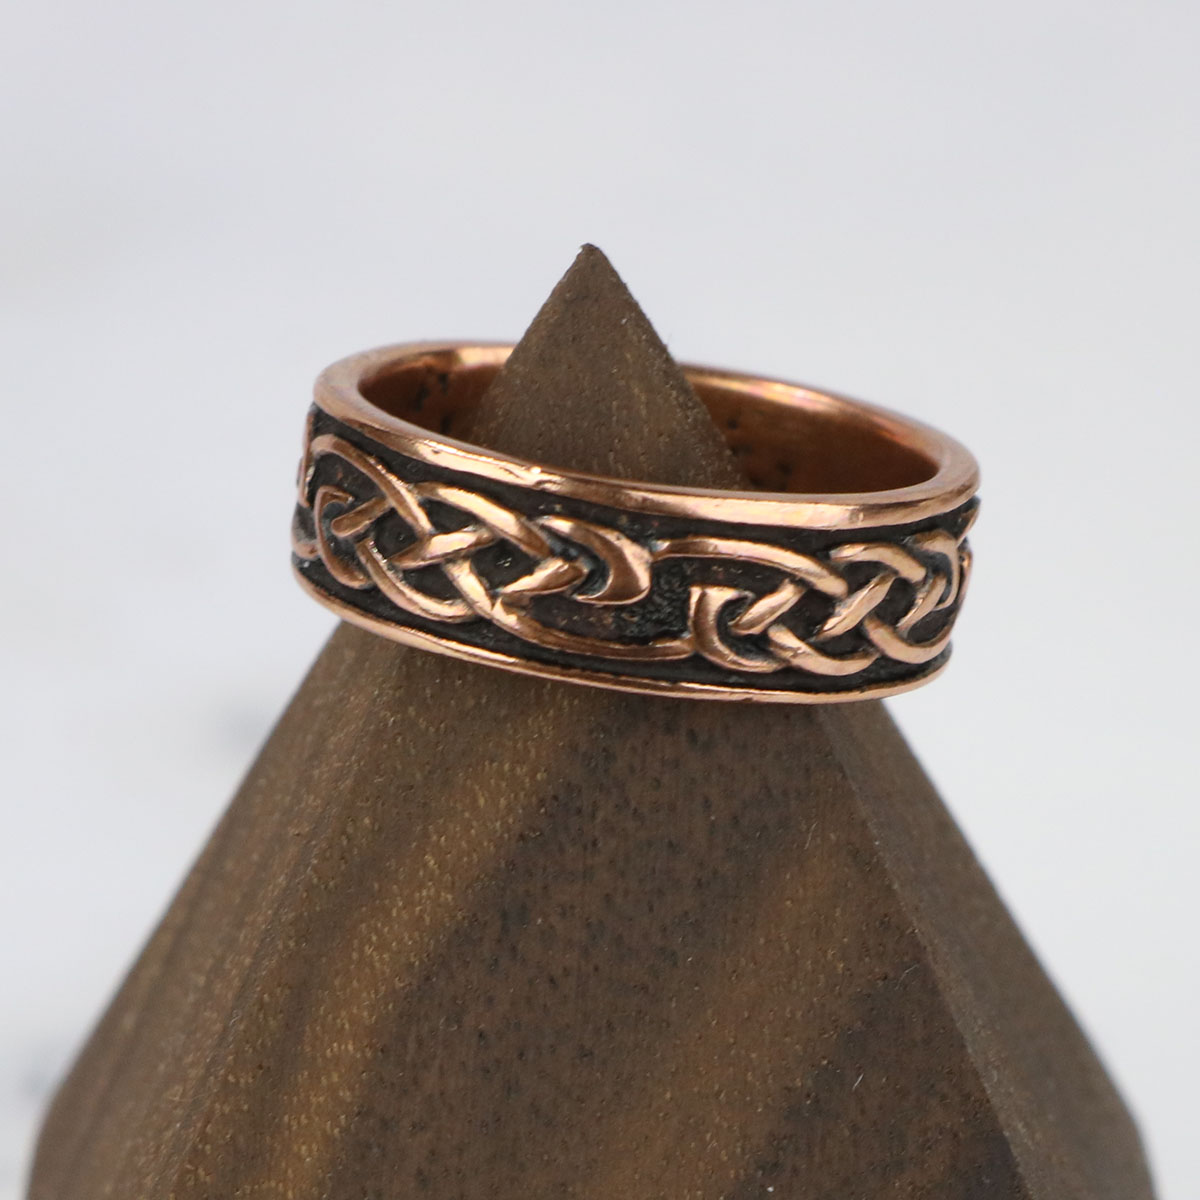 A copper Celtic knot wedding band from The Celtic Croft